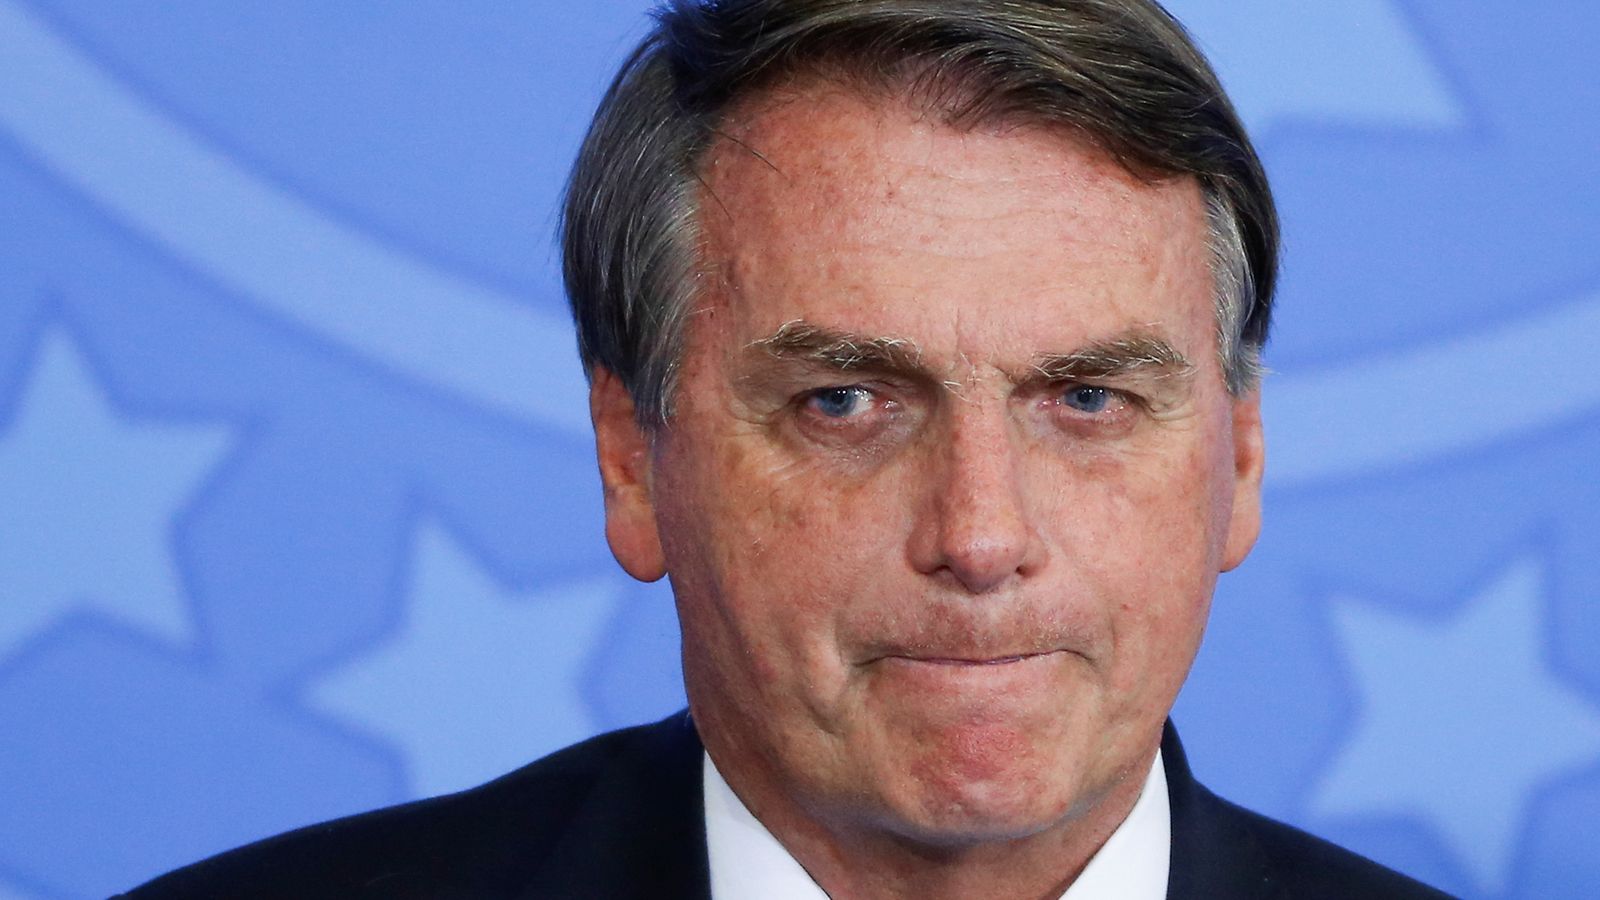 Brazil’s president Jair Bolsonaro should face homicide charges over 95,000 COVID-19 deaths, draft report finds